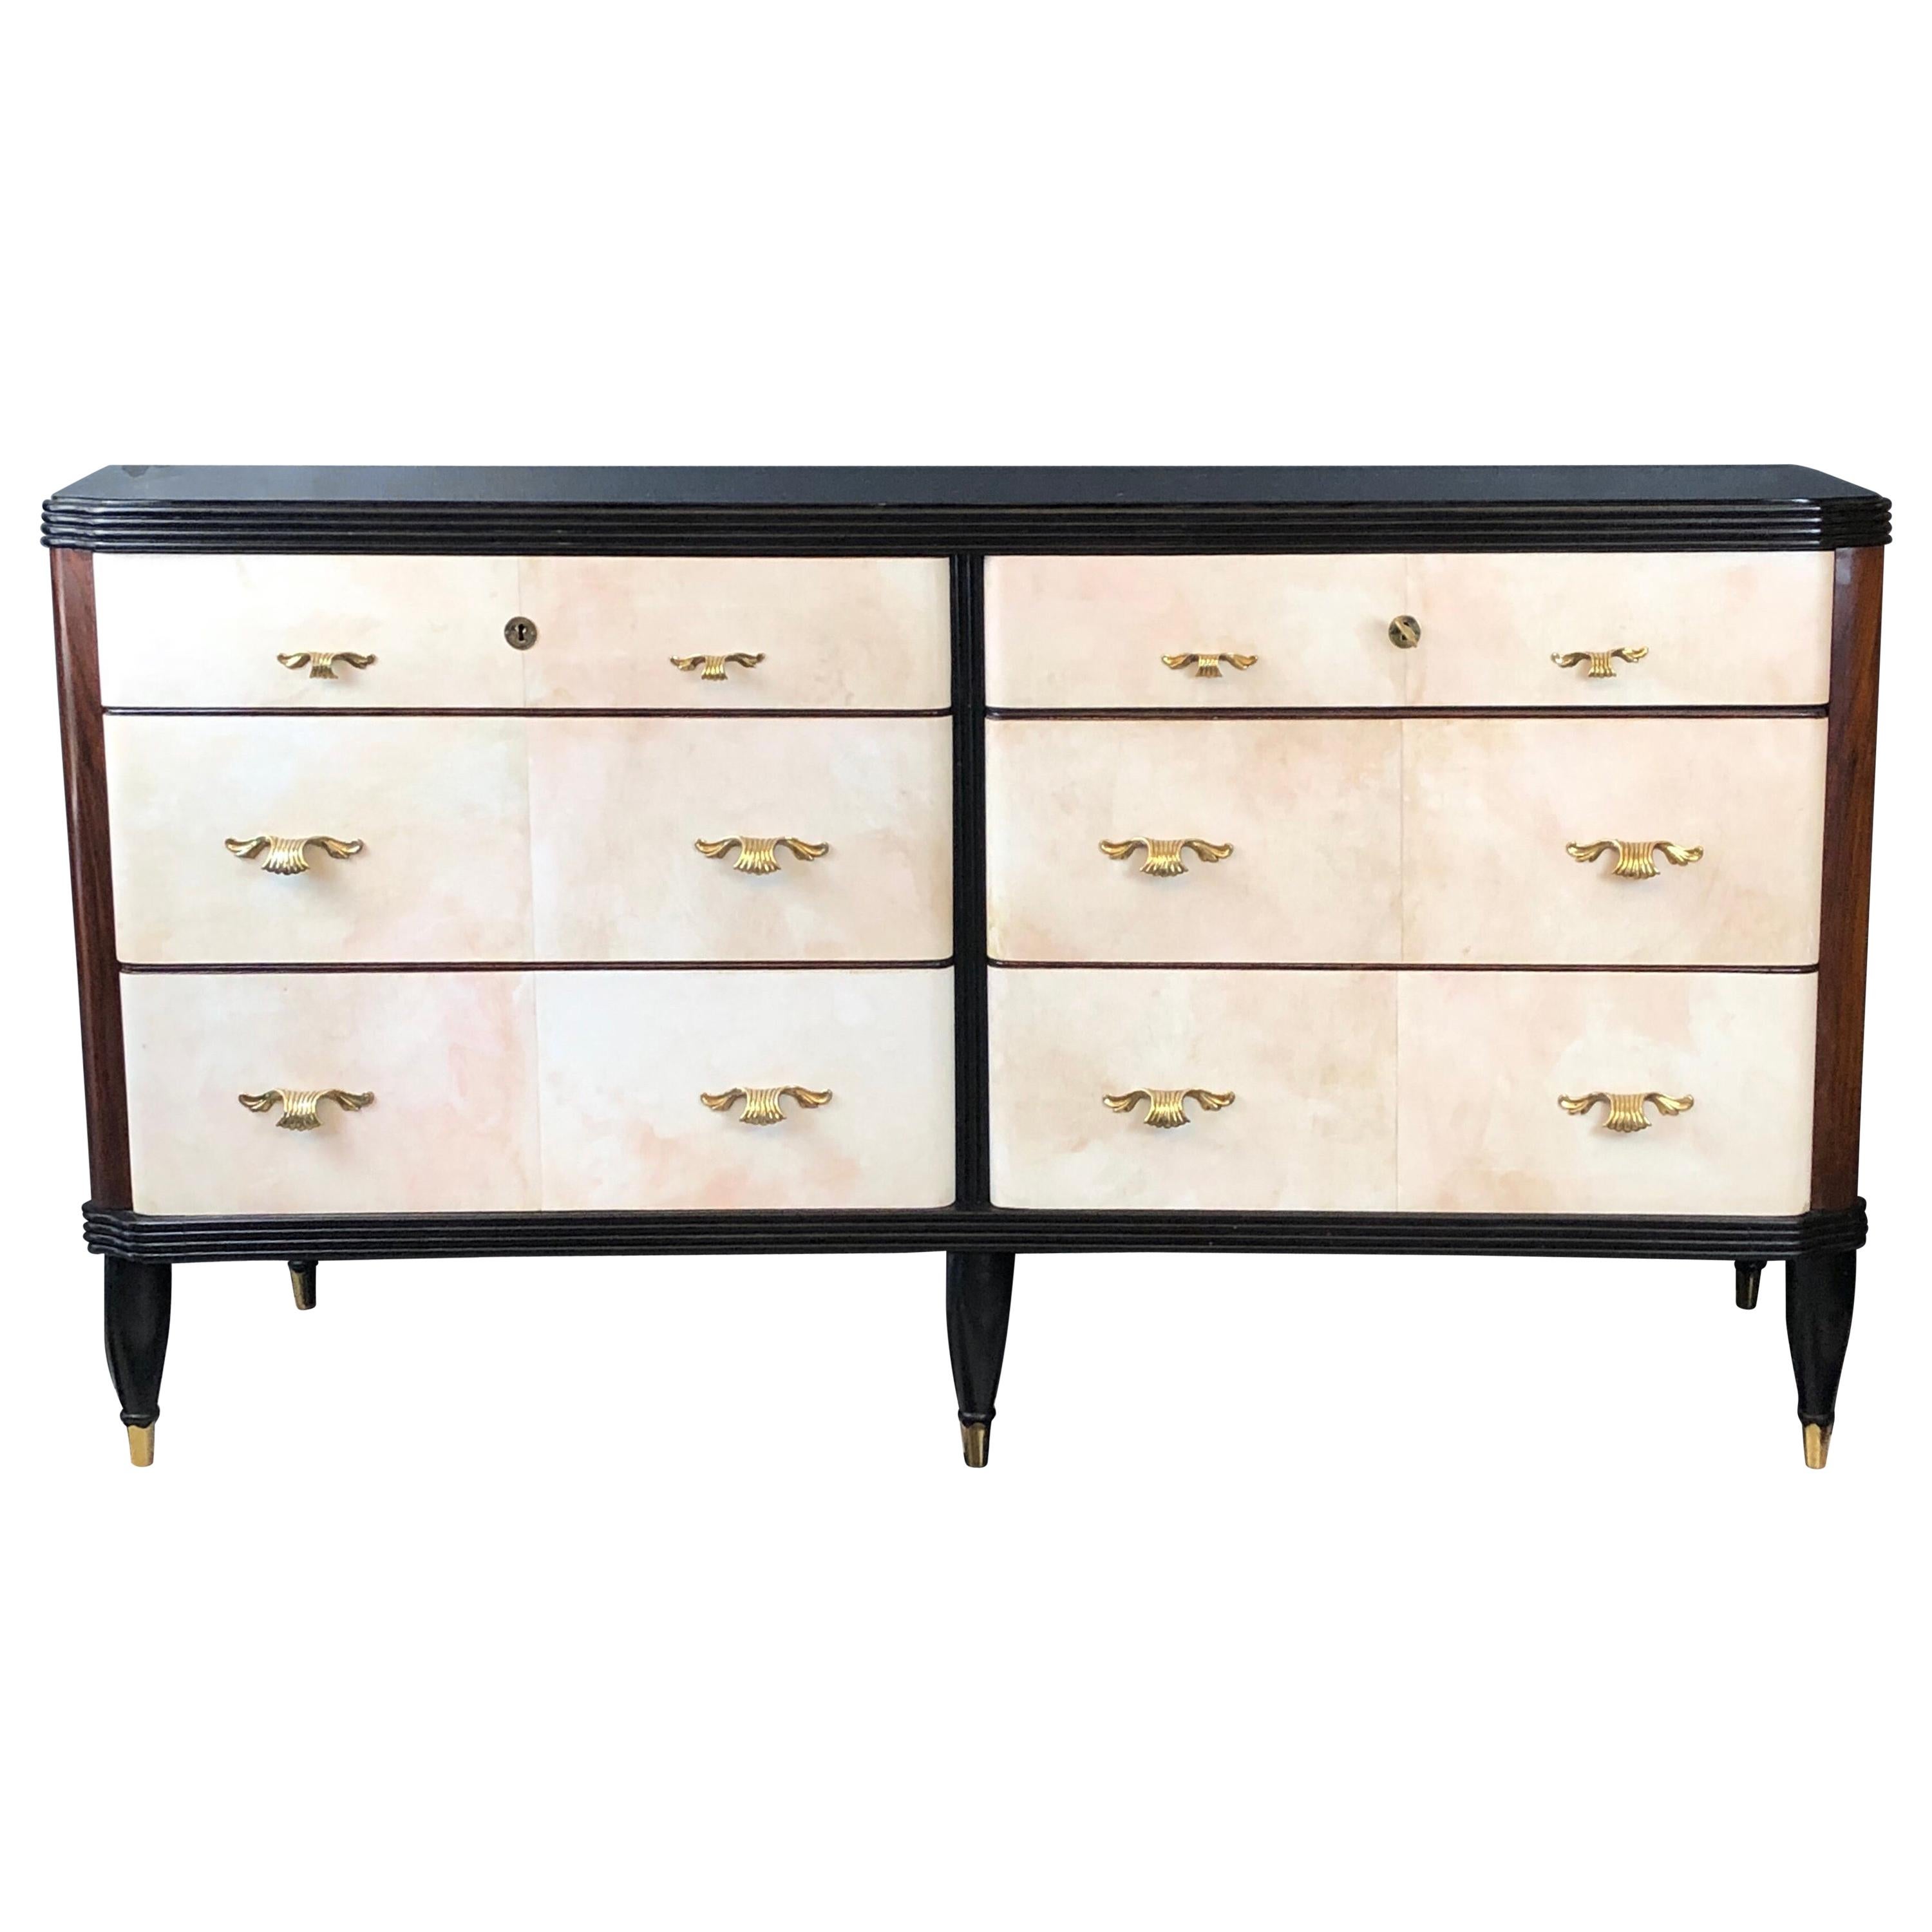 Parchment Commode with 6 Drawers and a Black Glass Top with a Detachable Mirror 